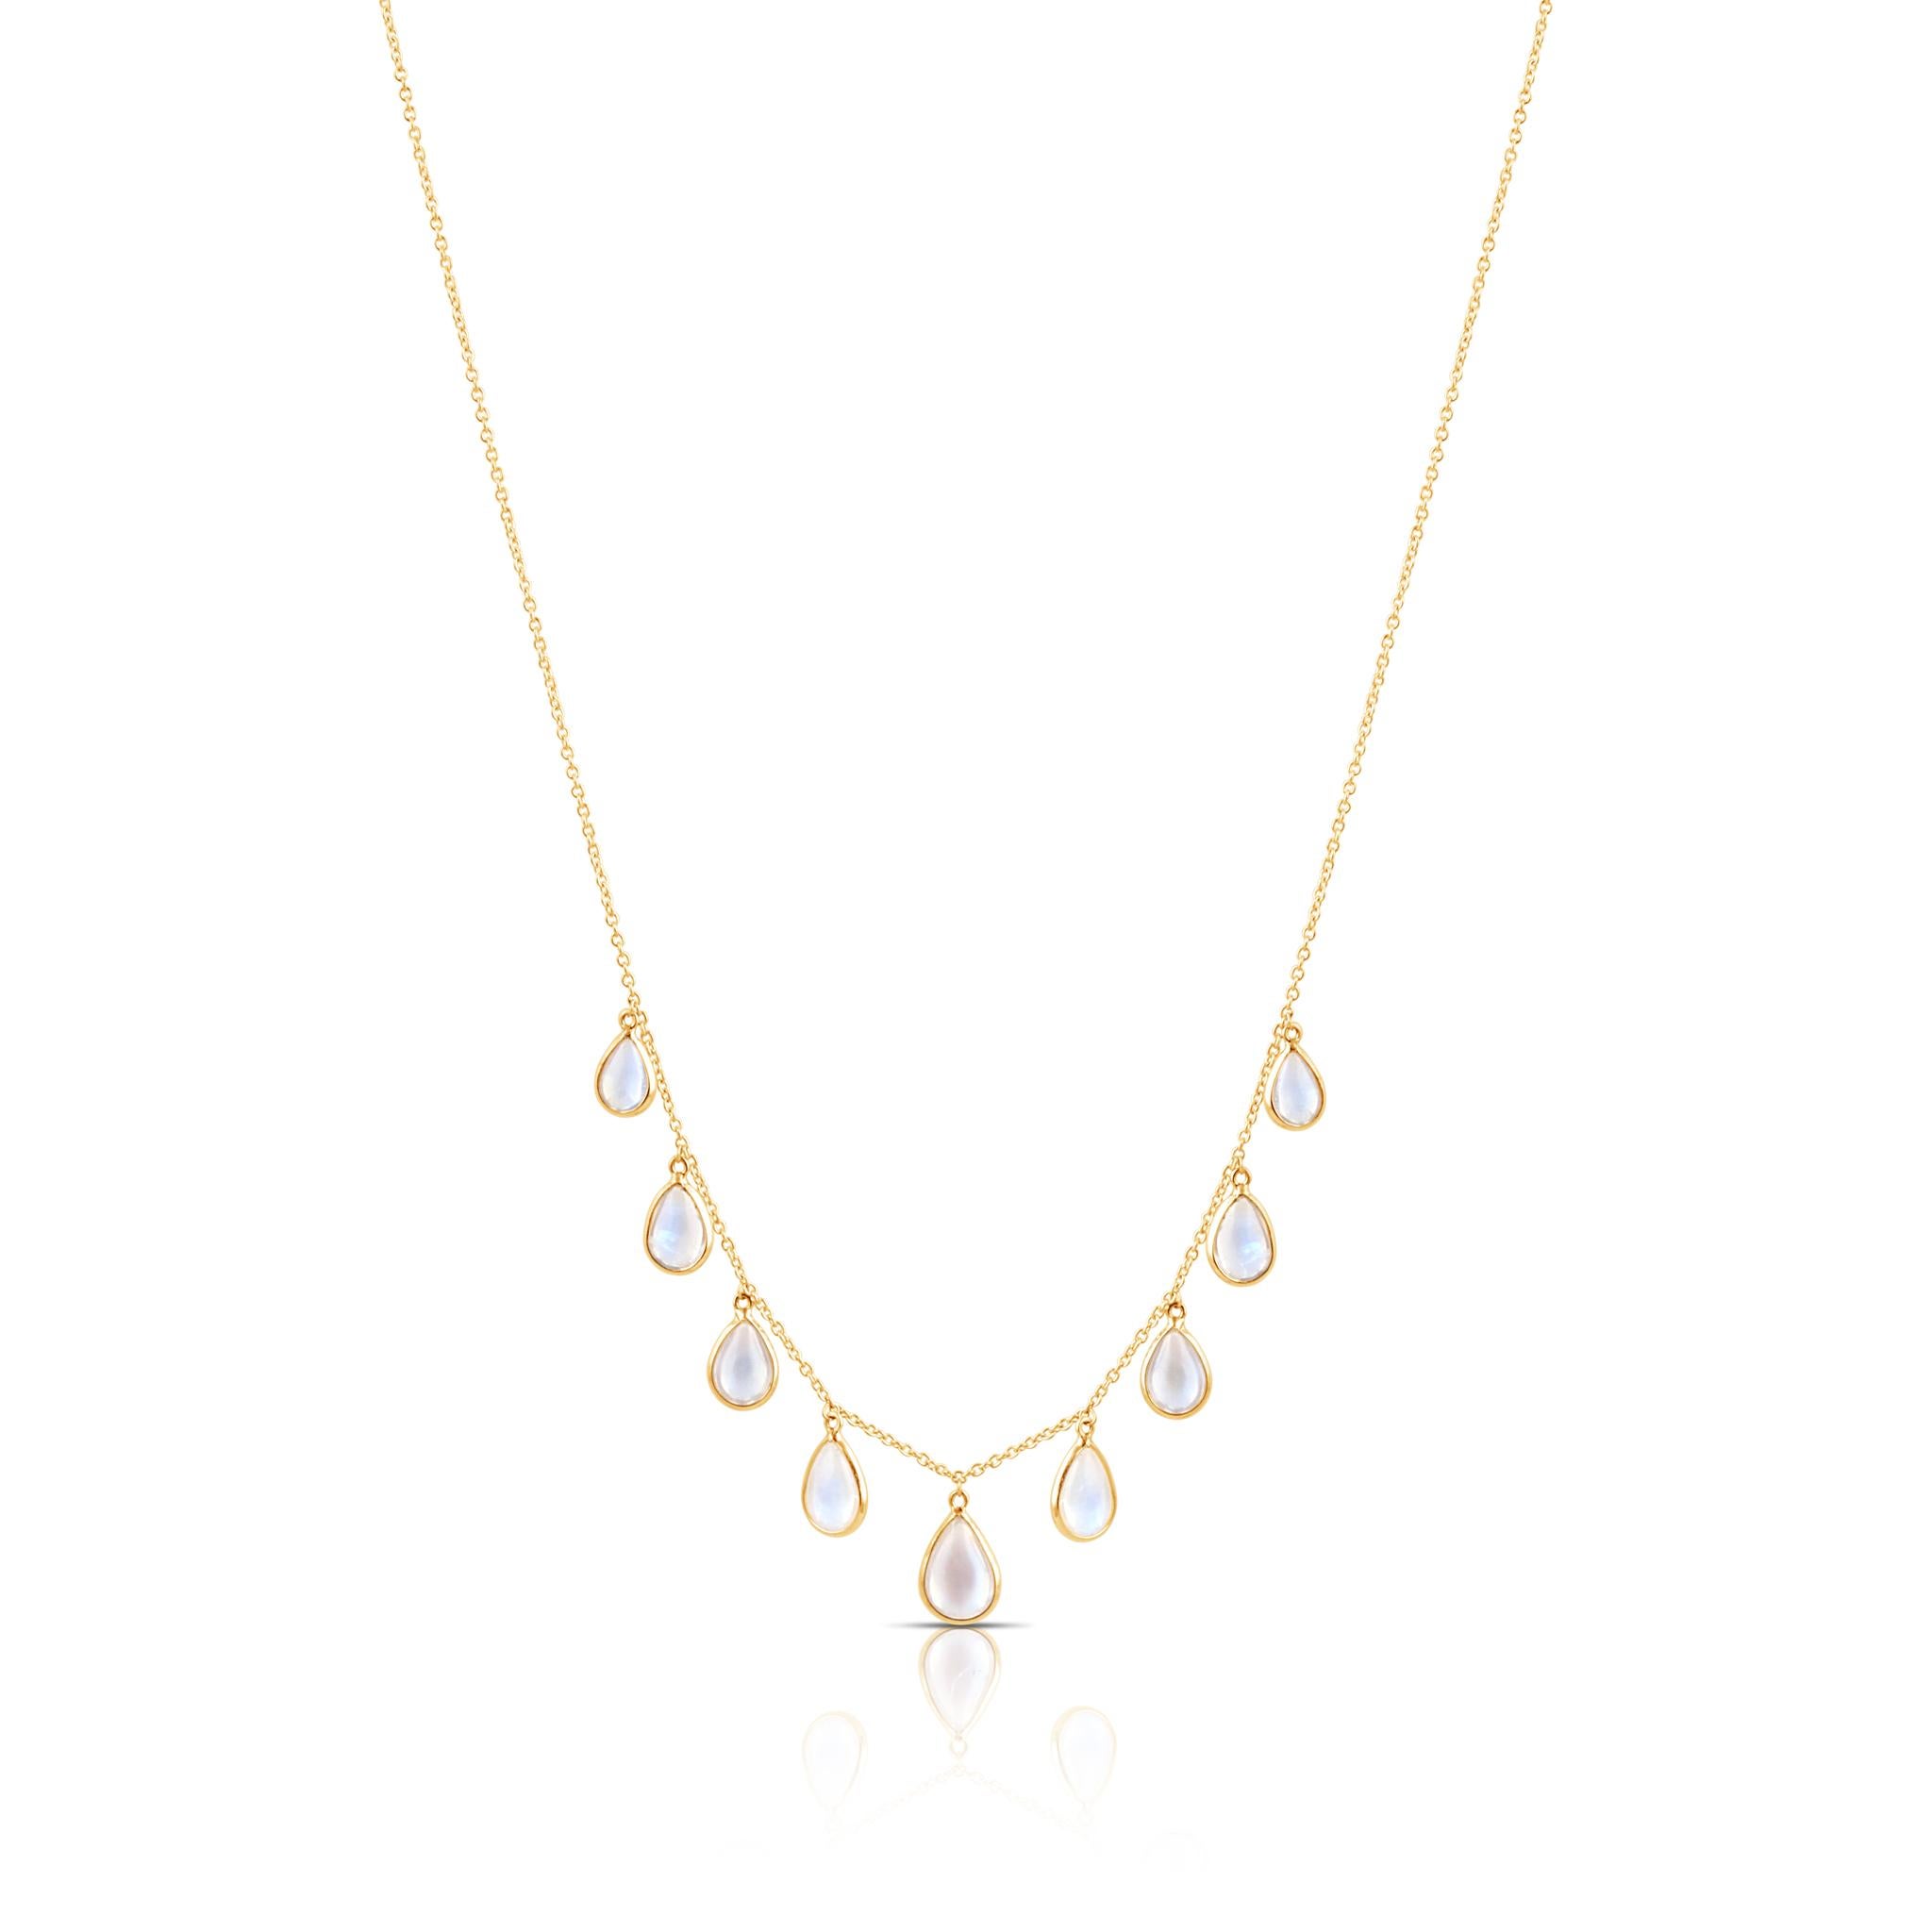 Tresor Beautiful Necklace features 7.13 carats of Rainbow Moonstone. The Necklace are an ode to the luxurious yet classic beauty with sparkly gemstones and feminine hues. Their contemporary and modern design make them versatile in their use. The